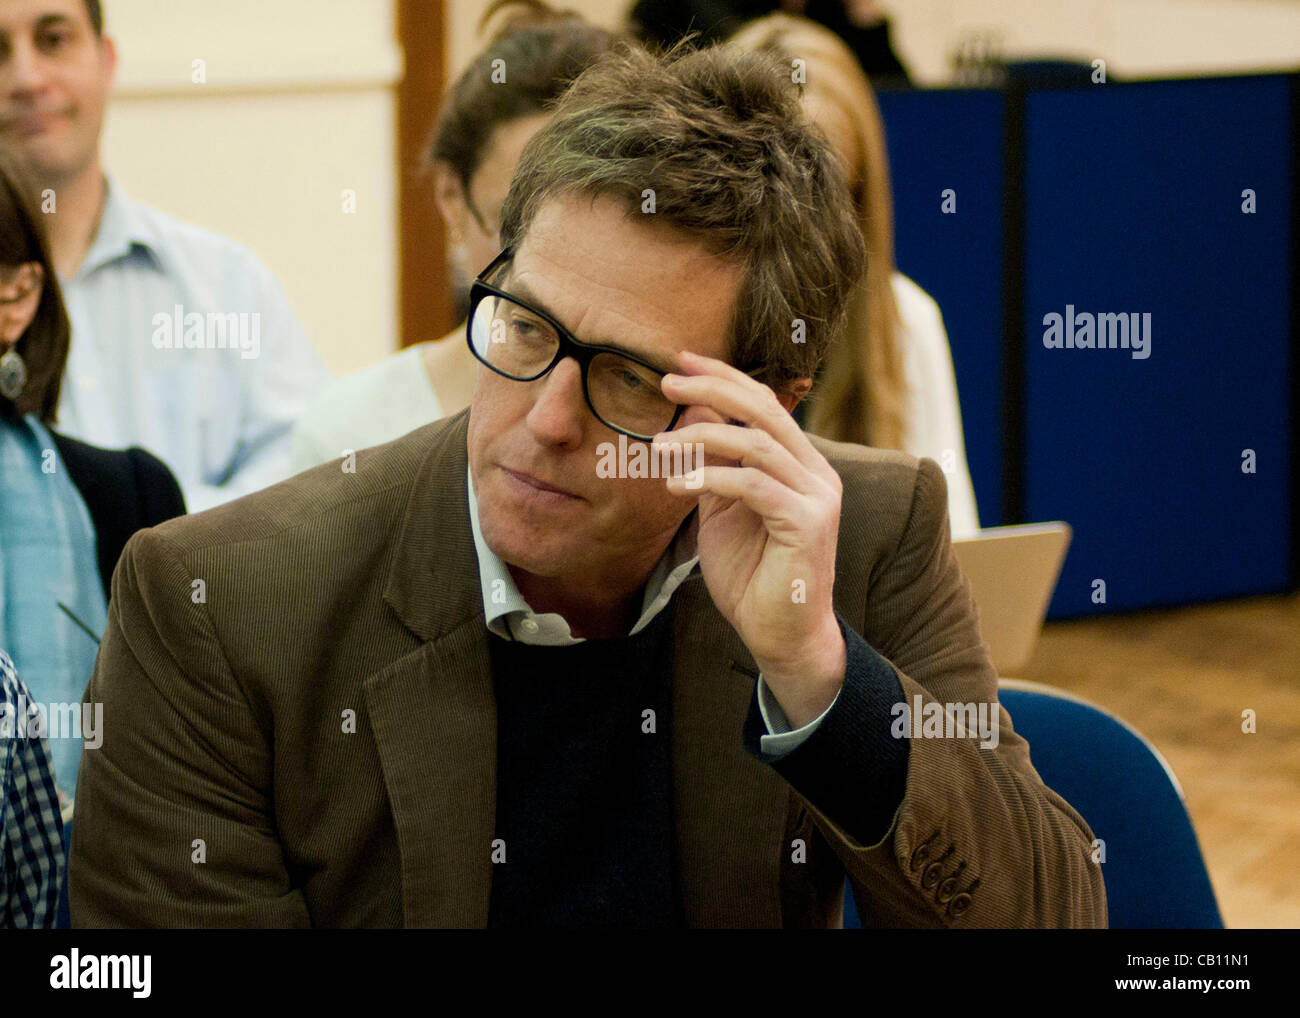 London, UK. 17/05/12. Actor Hugh Grant attends Hacked Off, the Coordinating Committee for Media Reform at the Central Methodist Church, London. Stock Photo